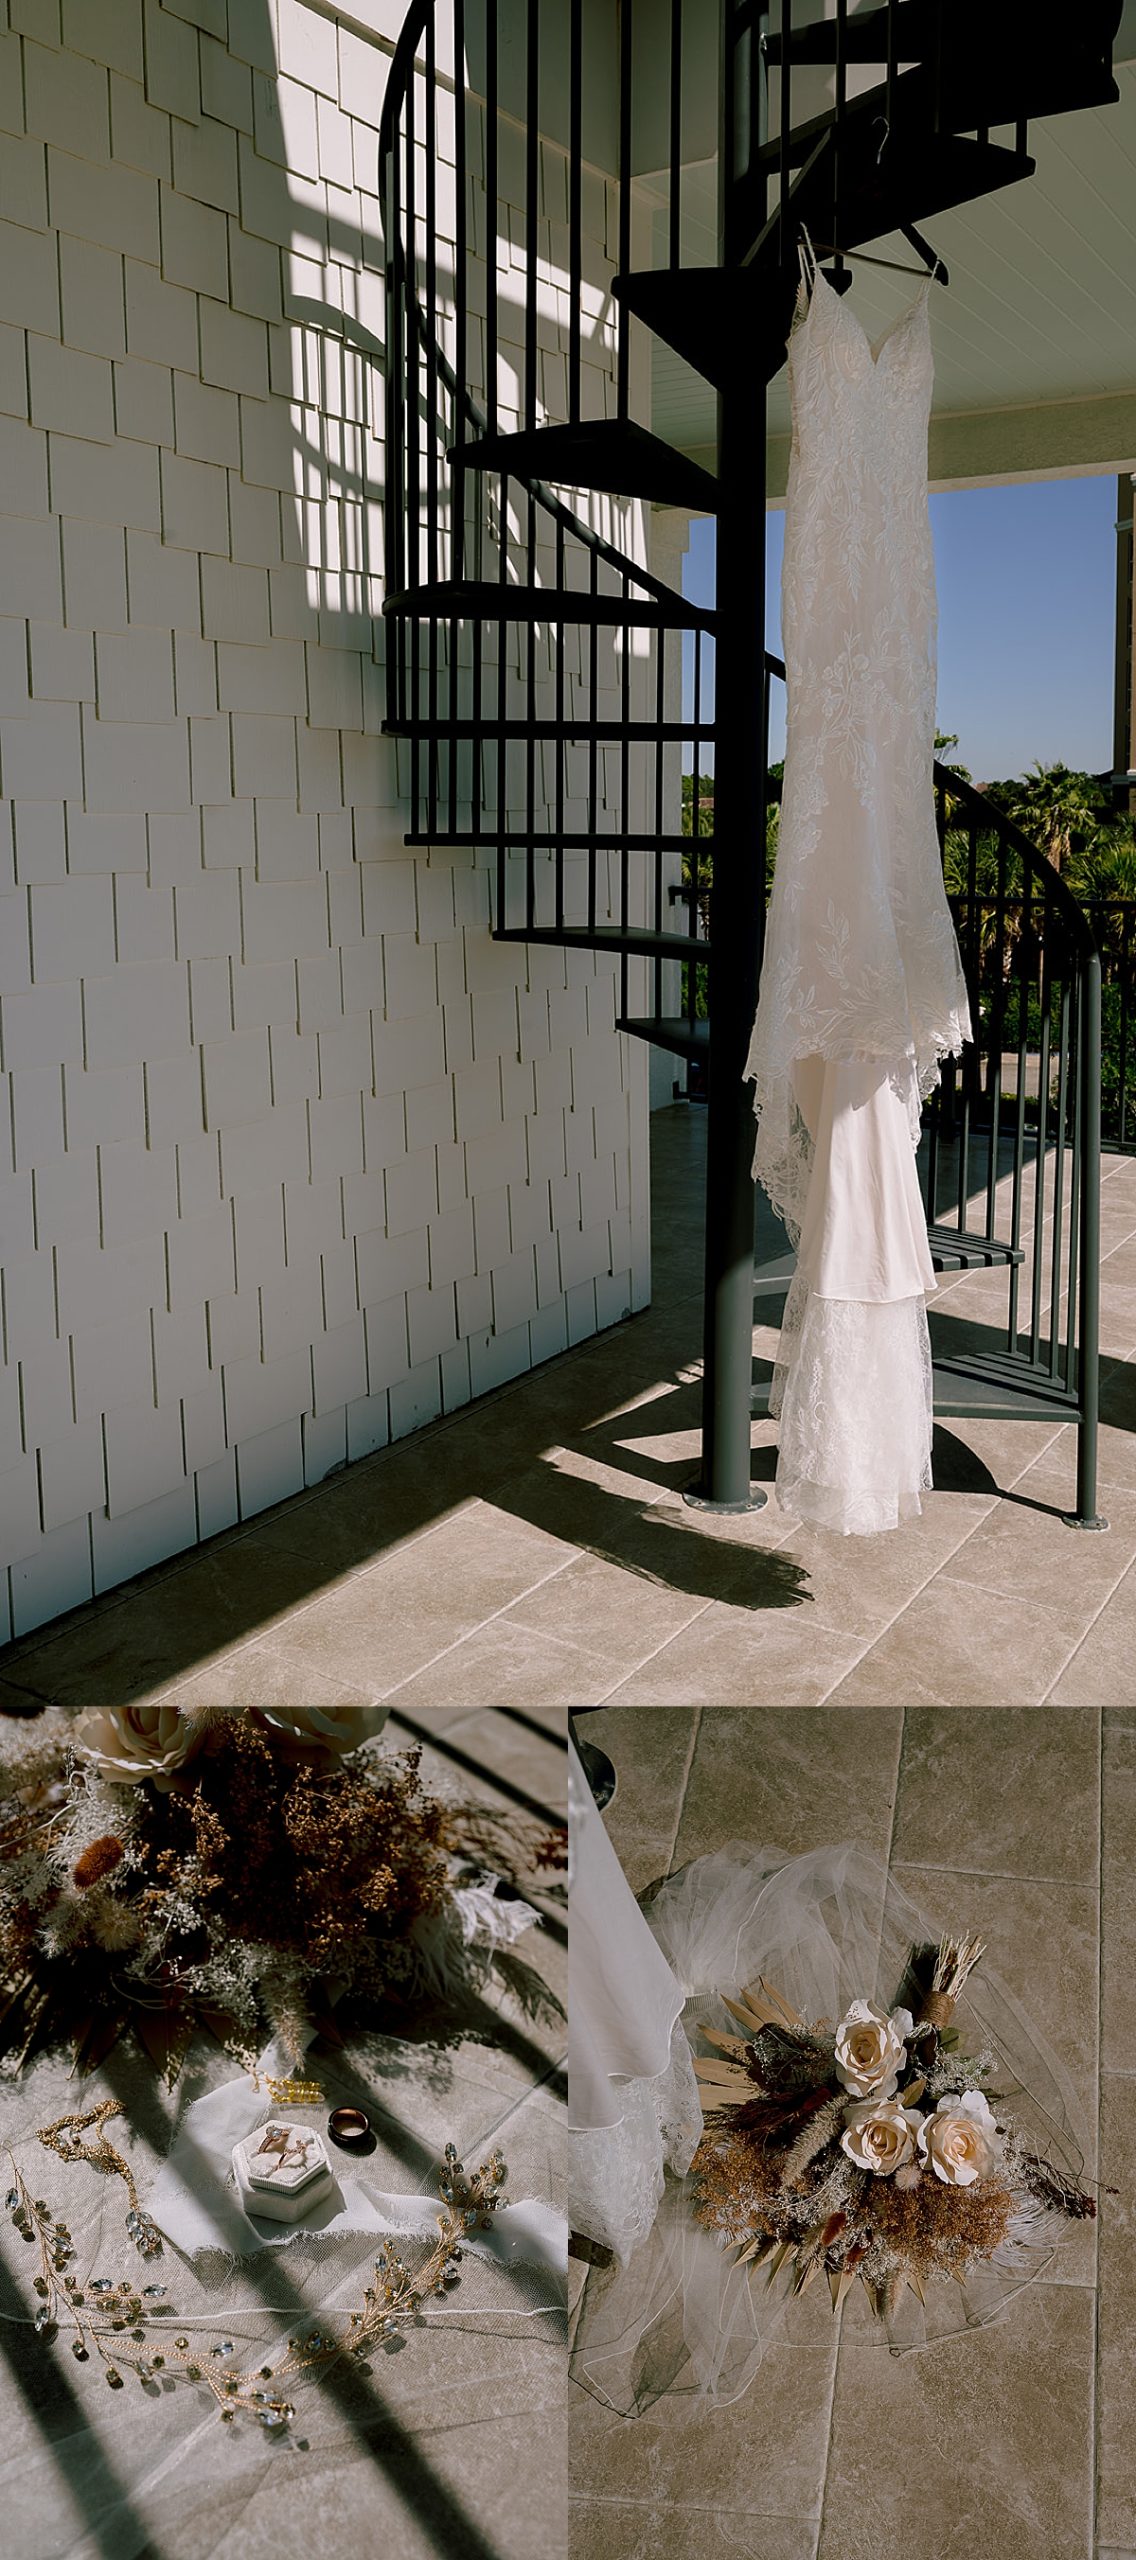 dress hung up on spiral steps at beach rental for 30A micro ceremony